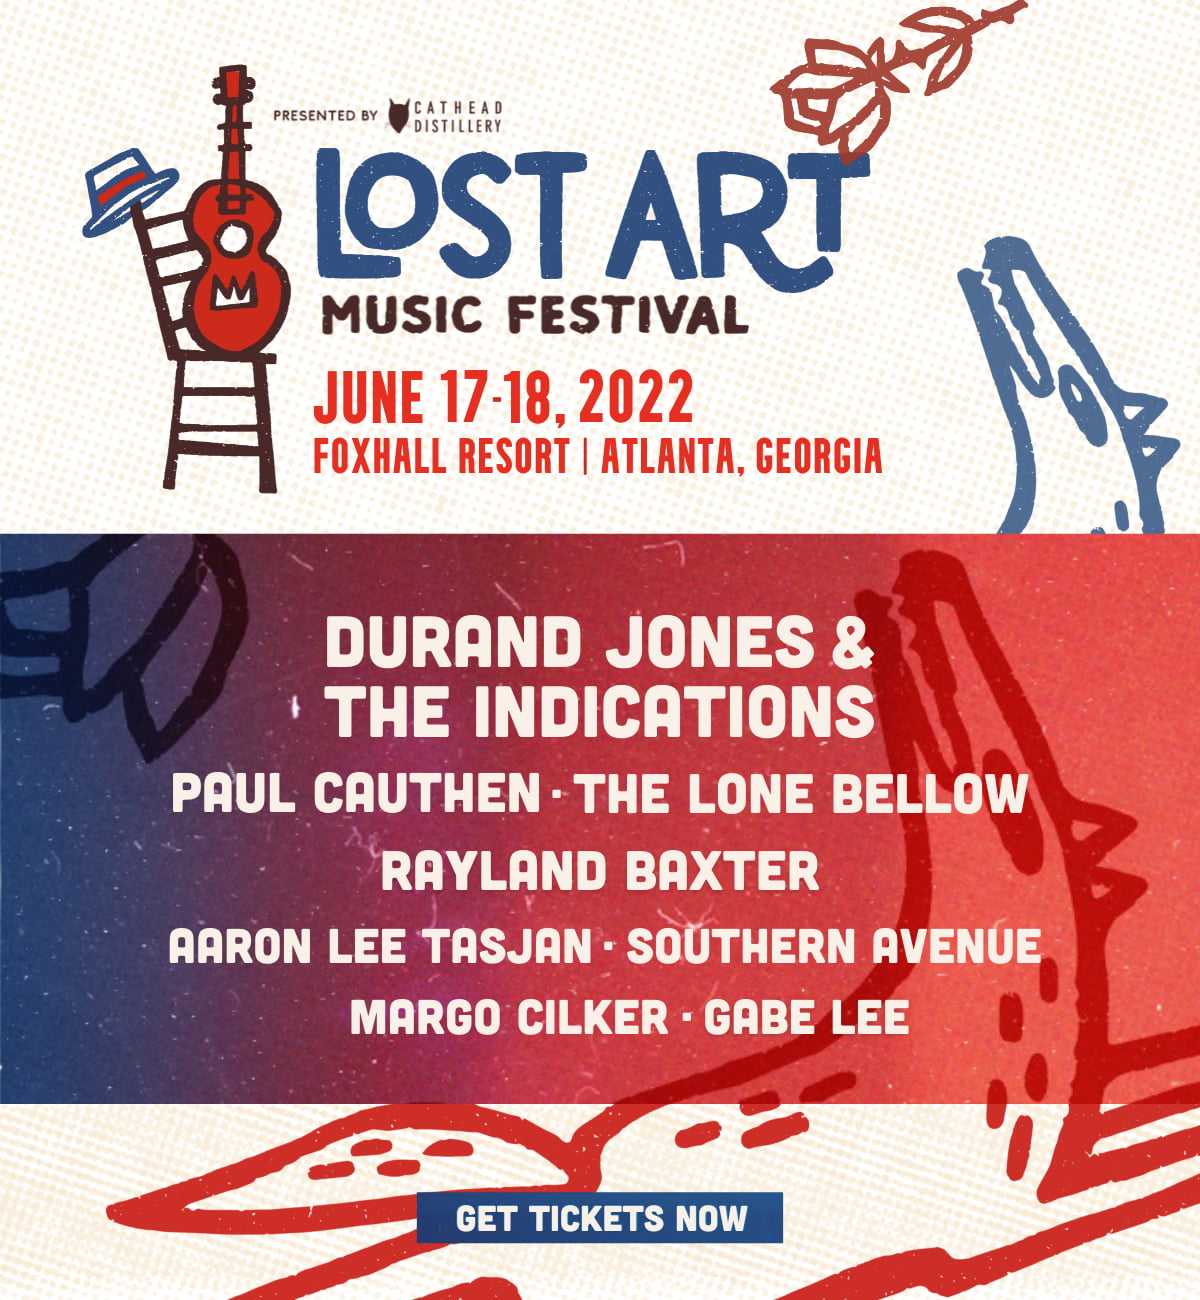 Festival logo, date, location, lineup plus wolf, rose, guitar, hat, chair